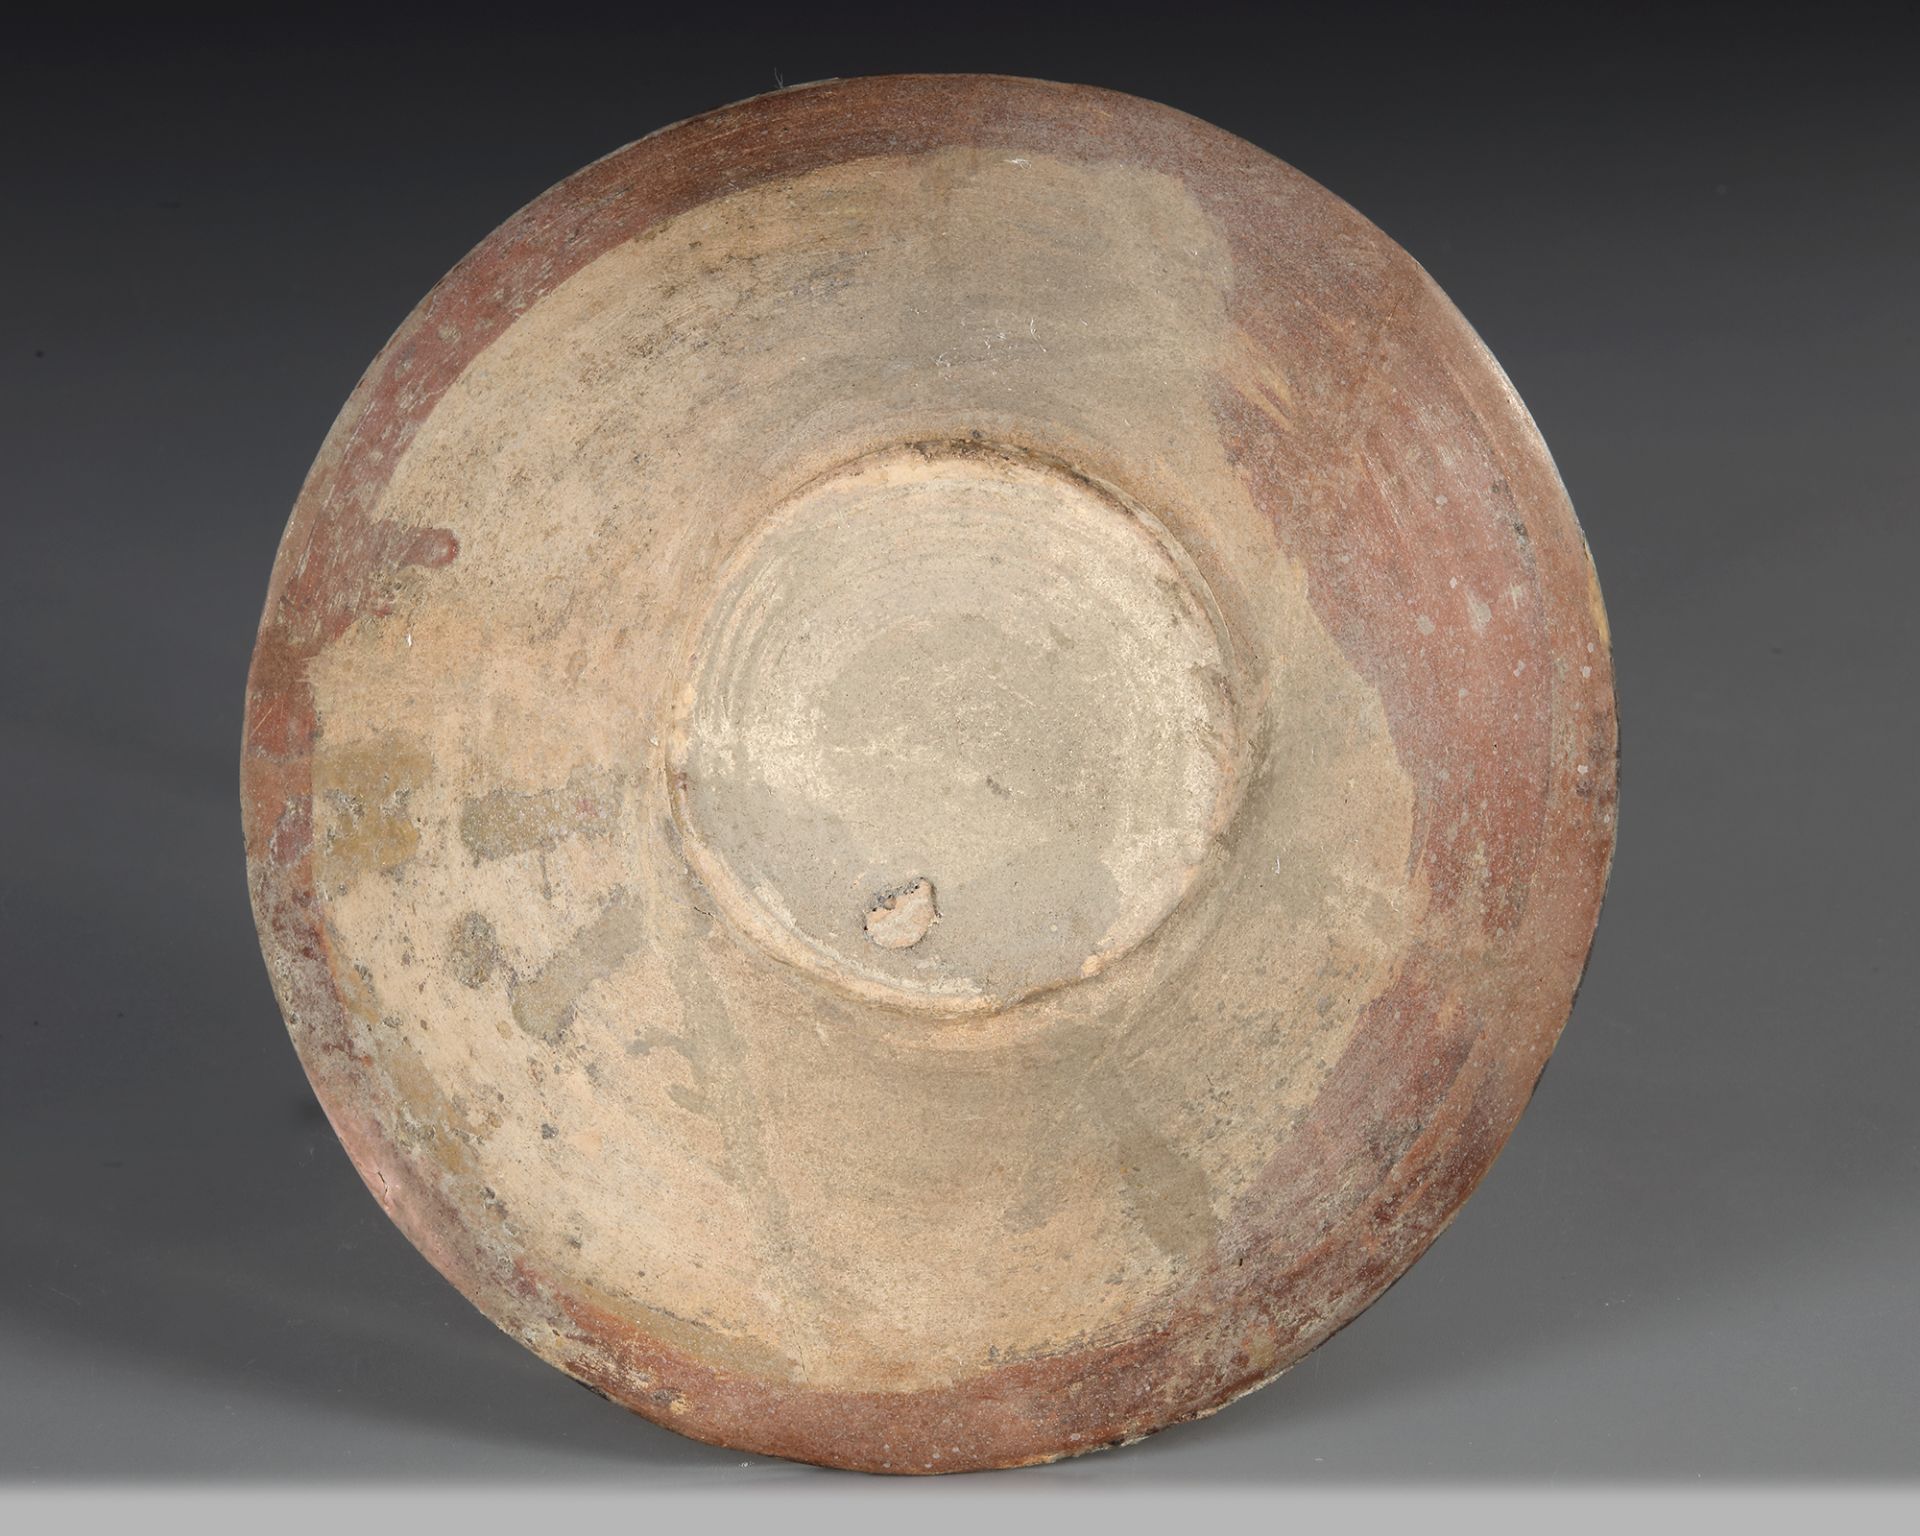 A NISHAPUR CONICAL POTTERY BOWL, PERSIA, 10TH CENTURY - Image 5 of 5